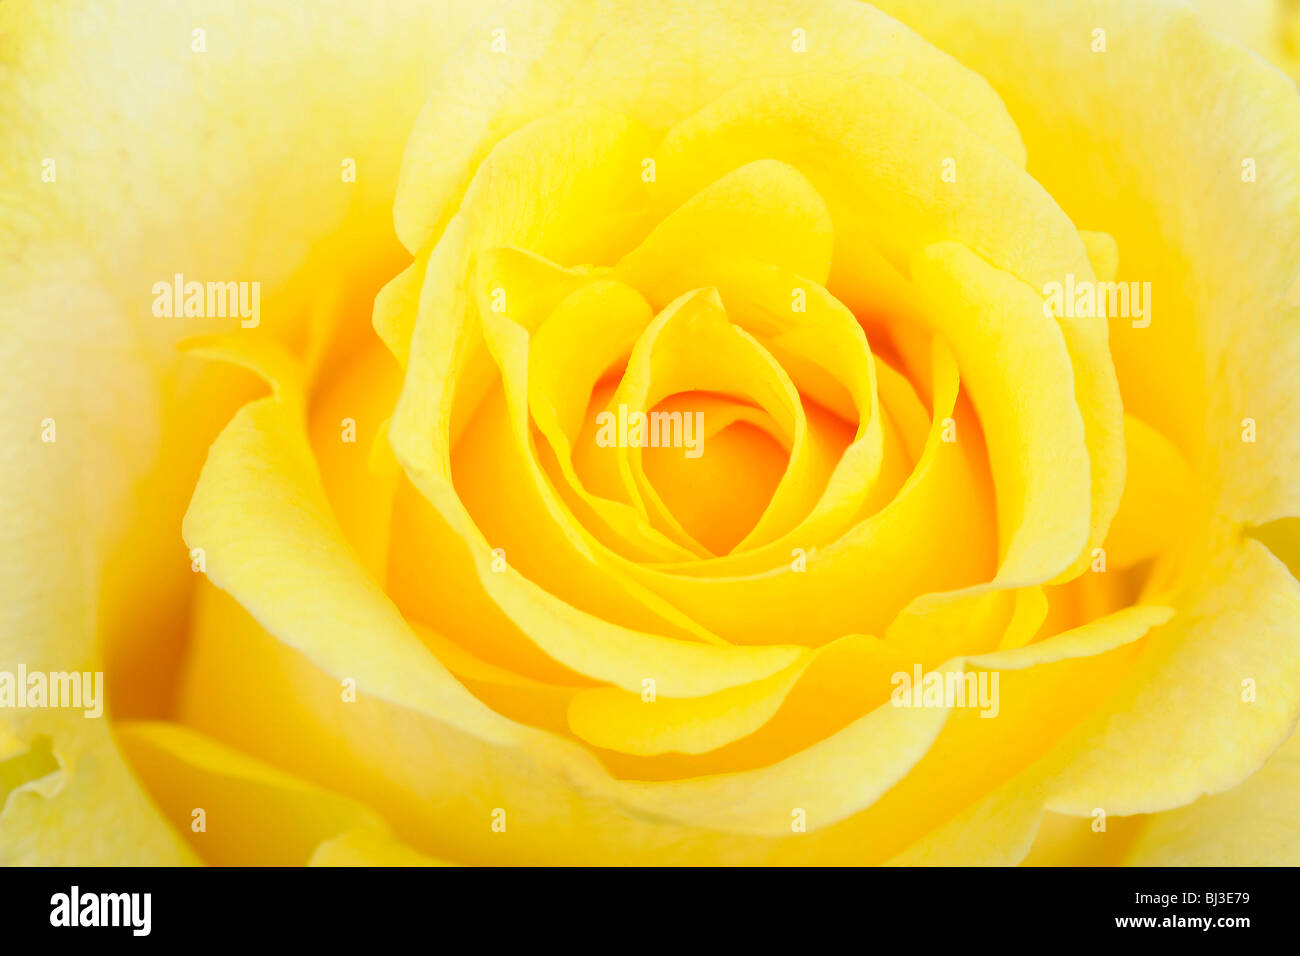 Yellow rose (Rosa), close-up Banque D'Images